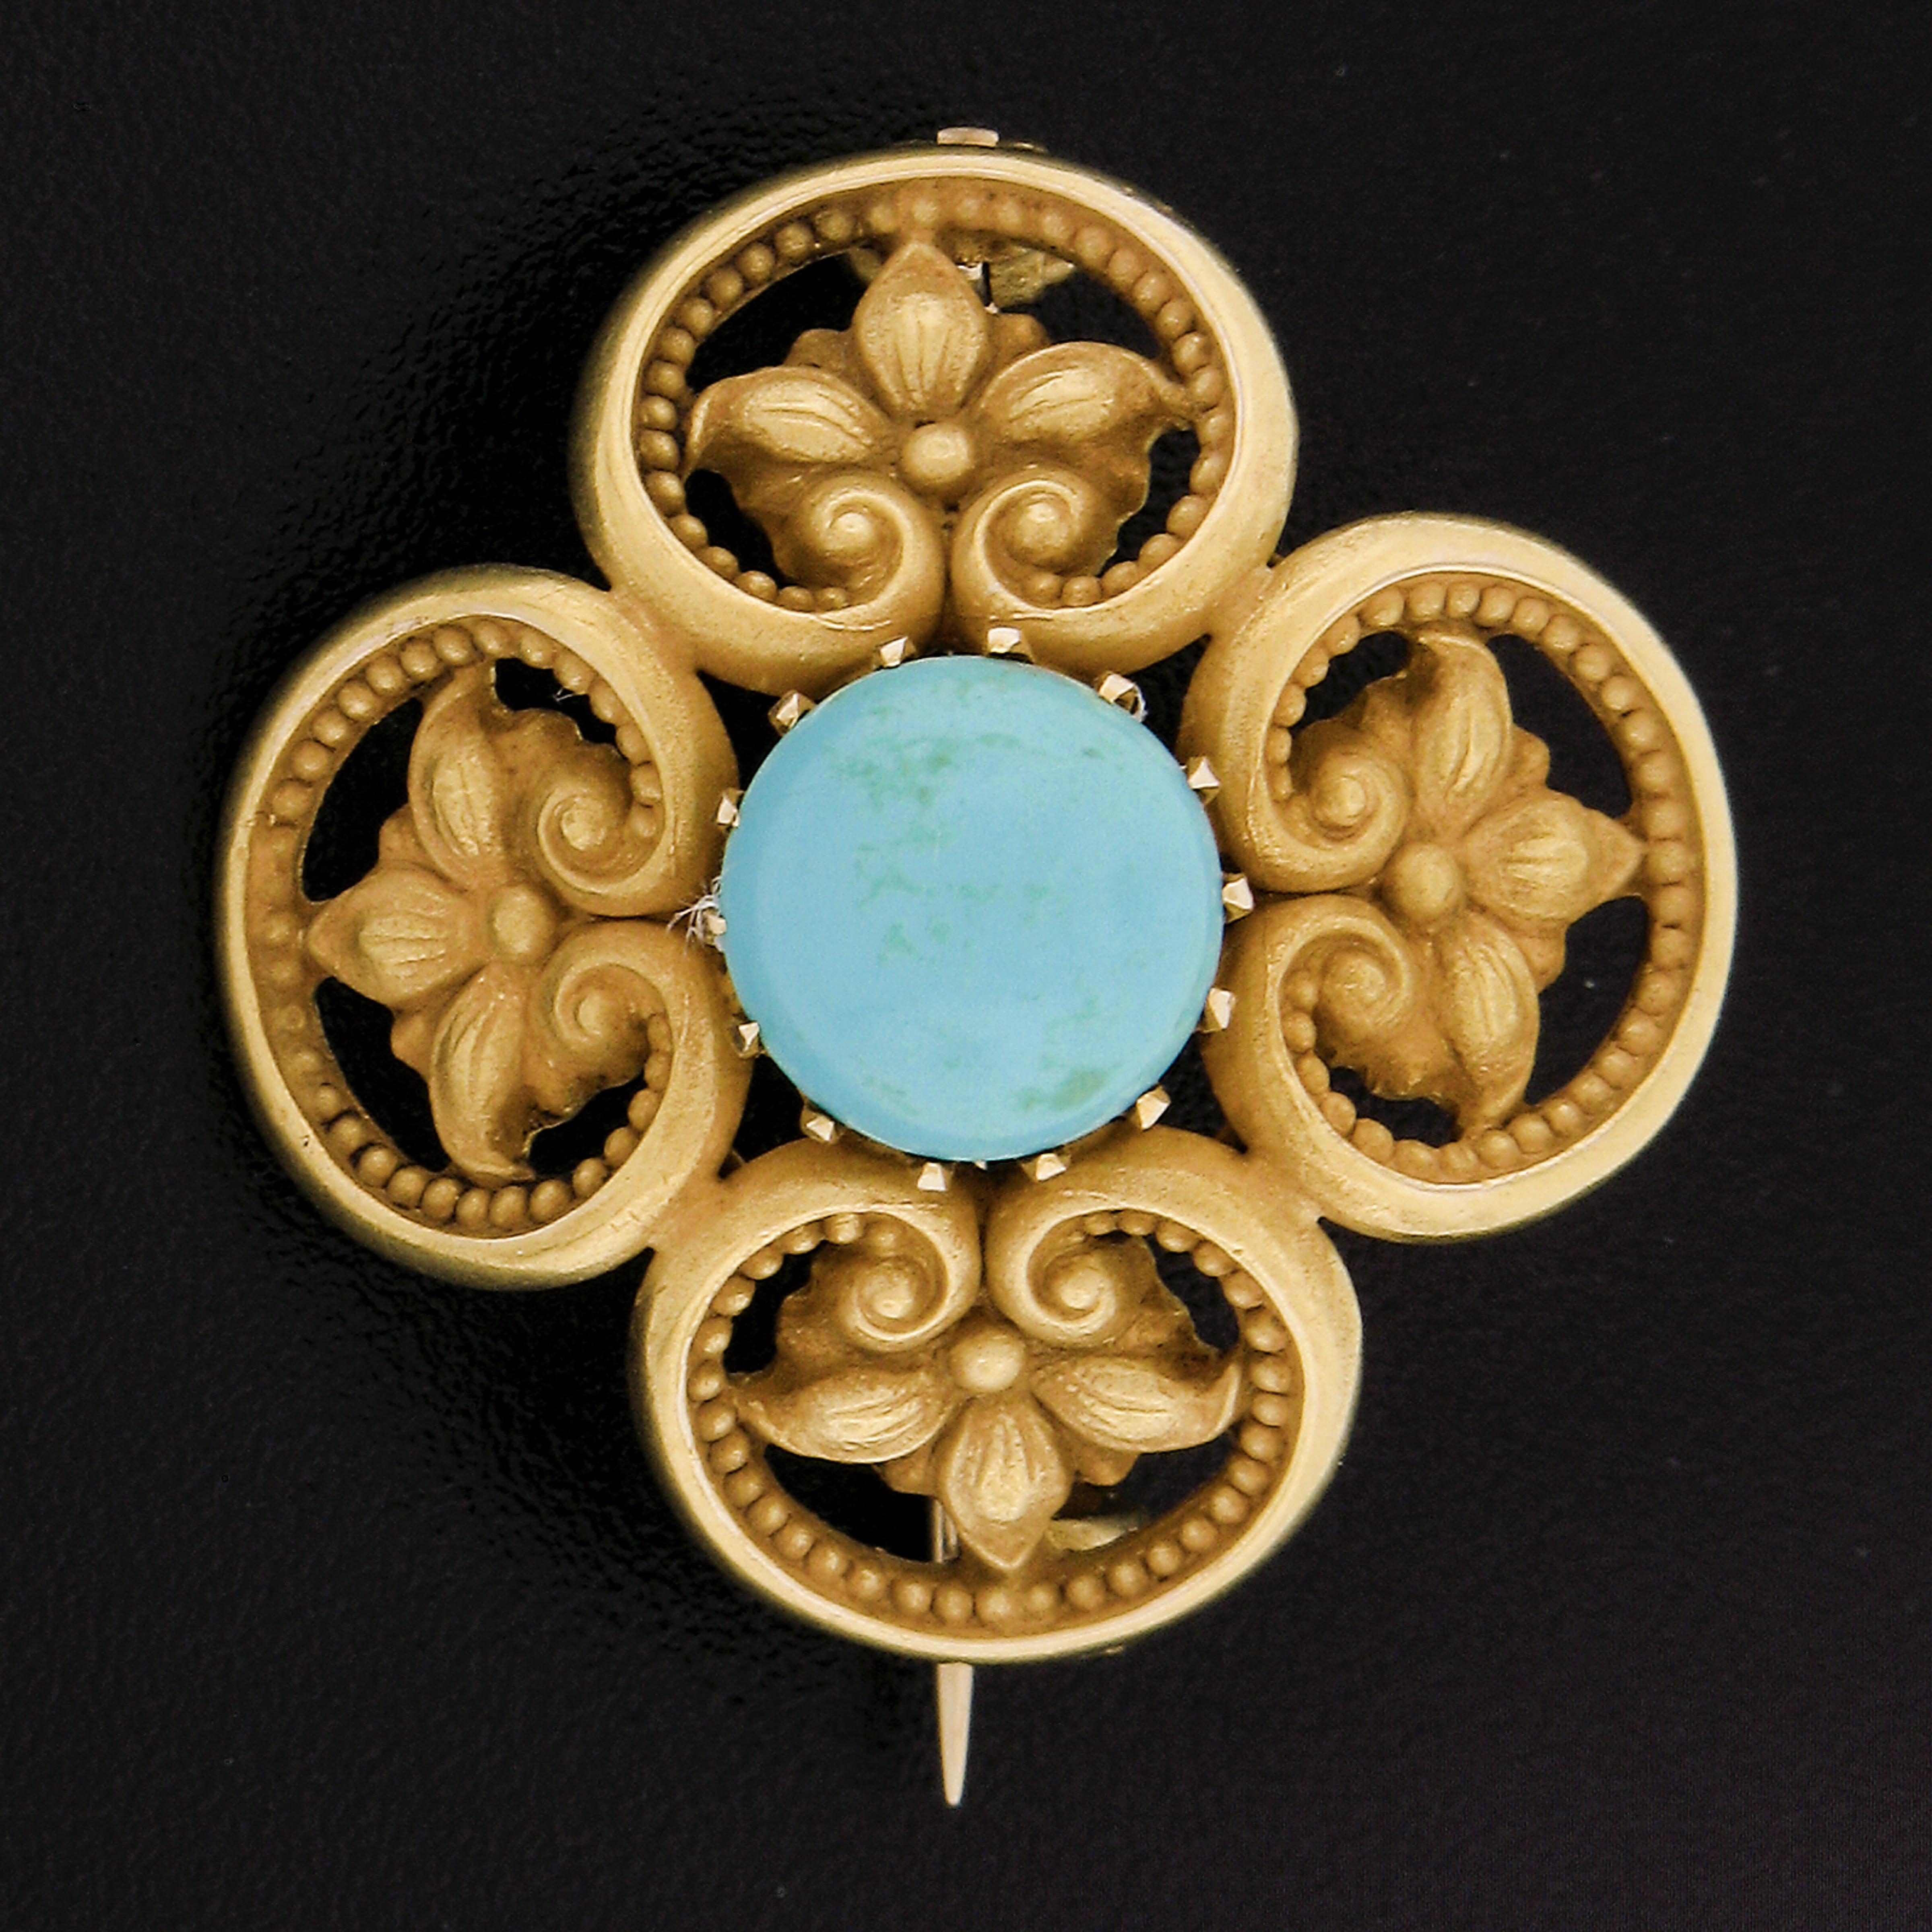 --Stone(s):--
(1) Natural Genuine Turquoise - Round Cabochon Cut - Multi Prong Set - Very Nice Turquoise Color - 8mm (approx.)

Material: 14k+ Solid Yellow Gold , Washed with High Karat Gold
Weight: 4.27 Grams
Clasp: Pin Backing w/ Hook